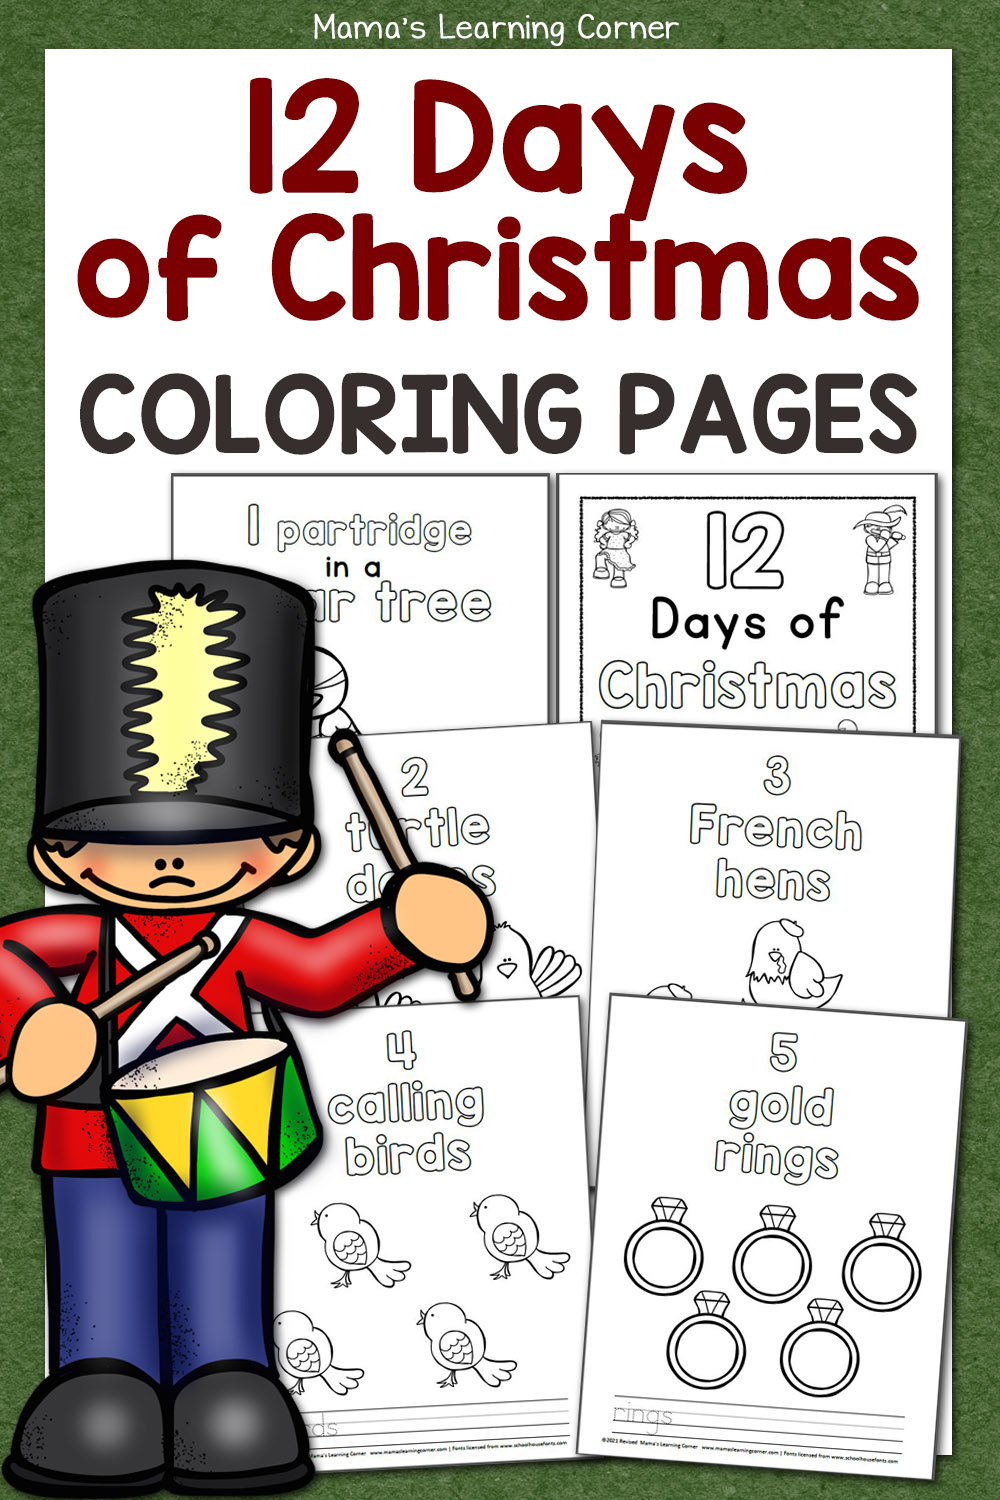 12 Days of Christmas Coloring Pages - Mamas Learning Corner